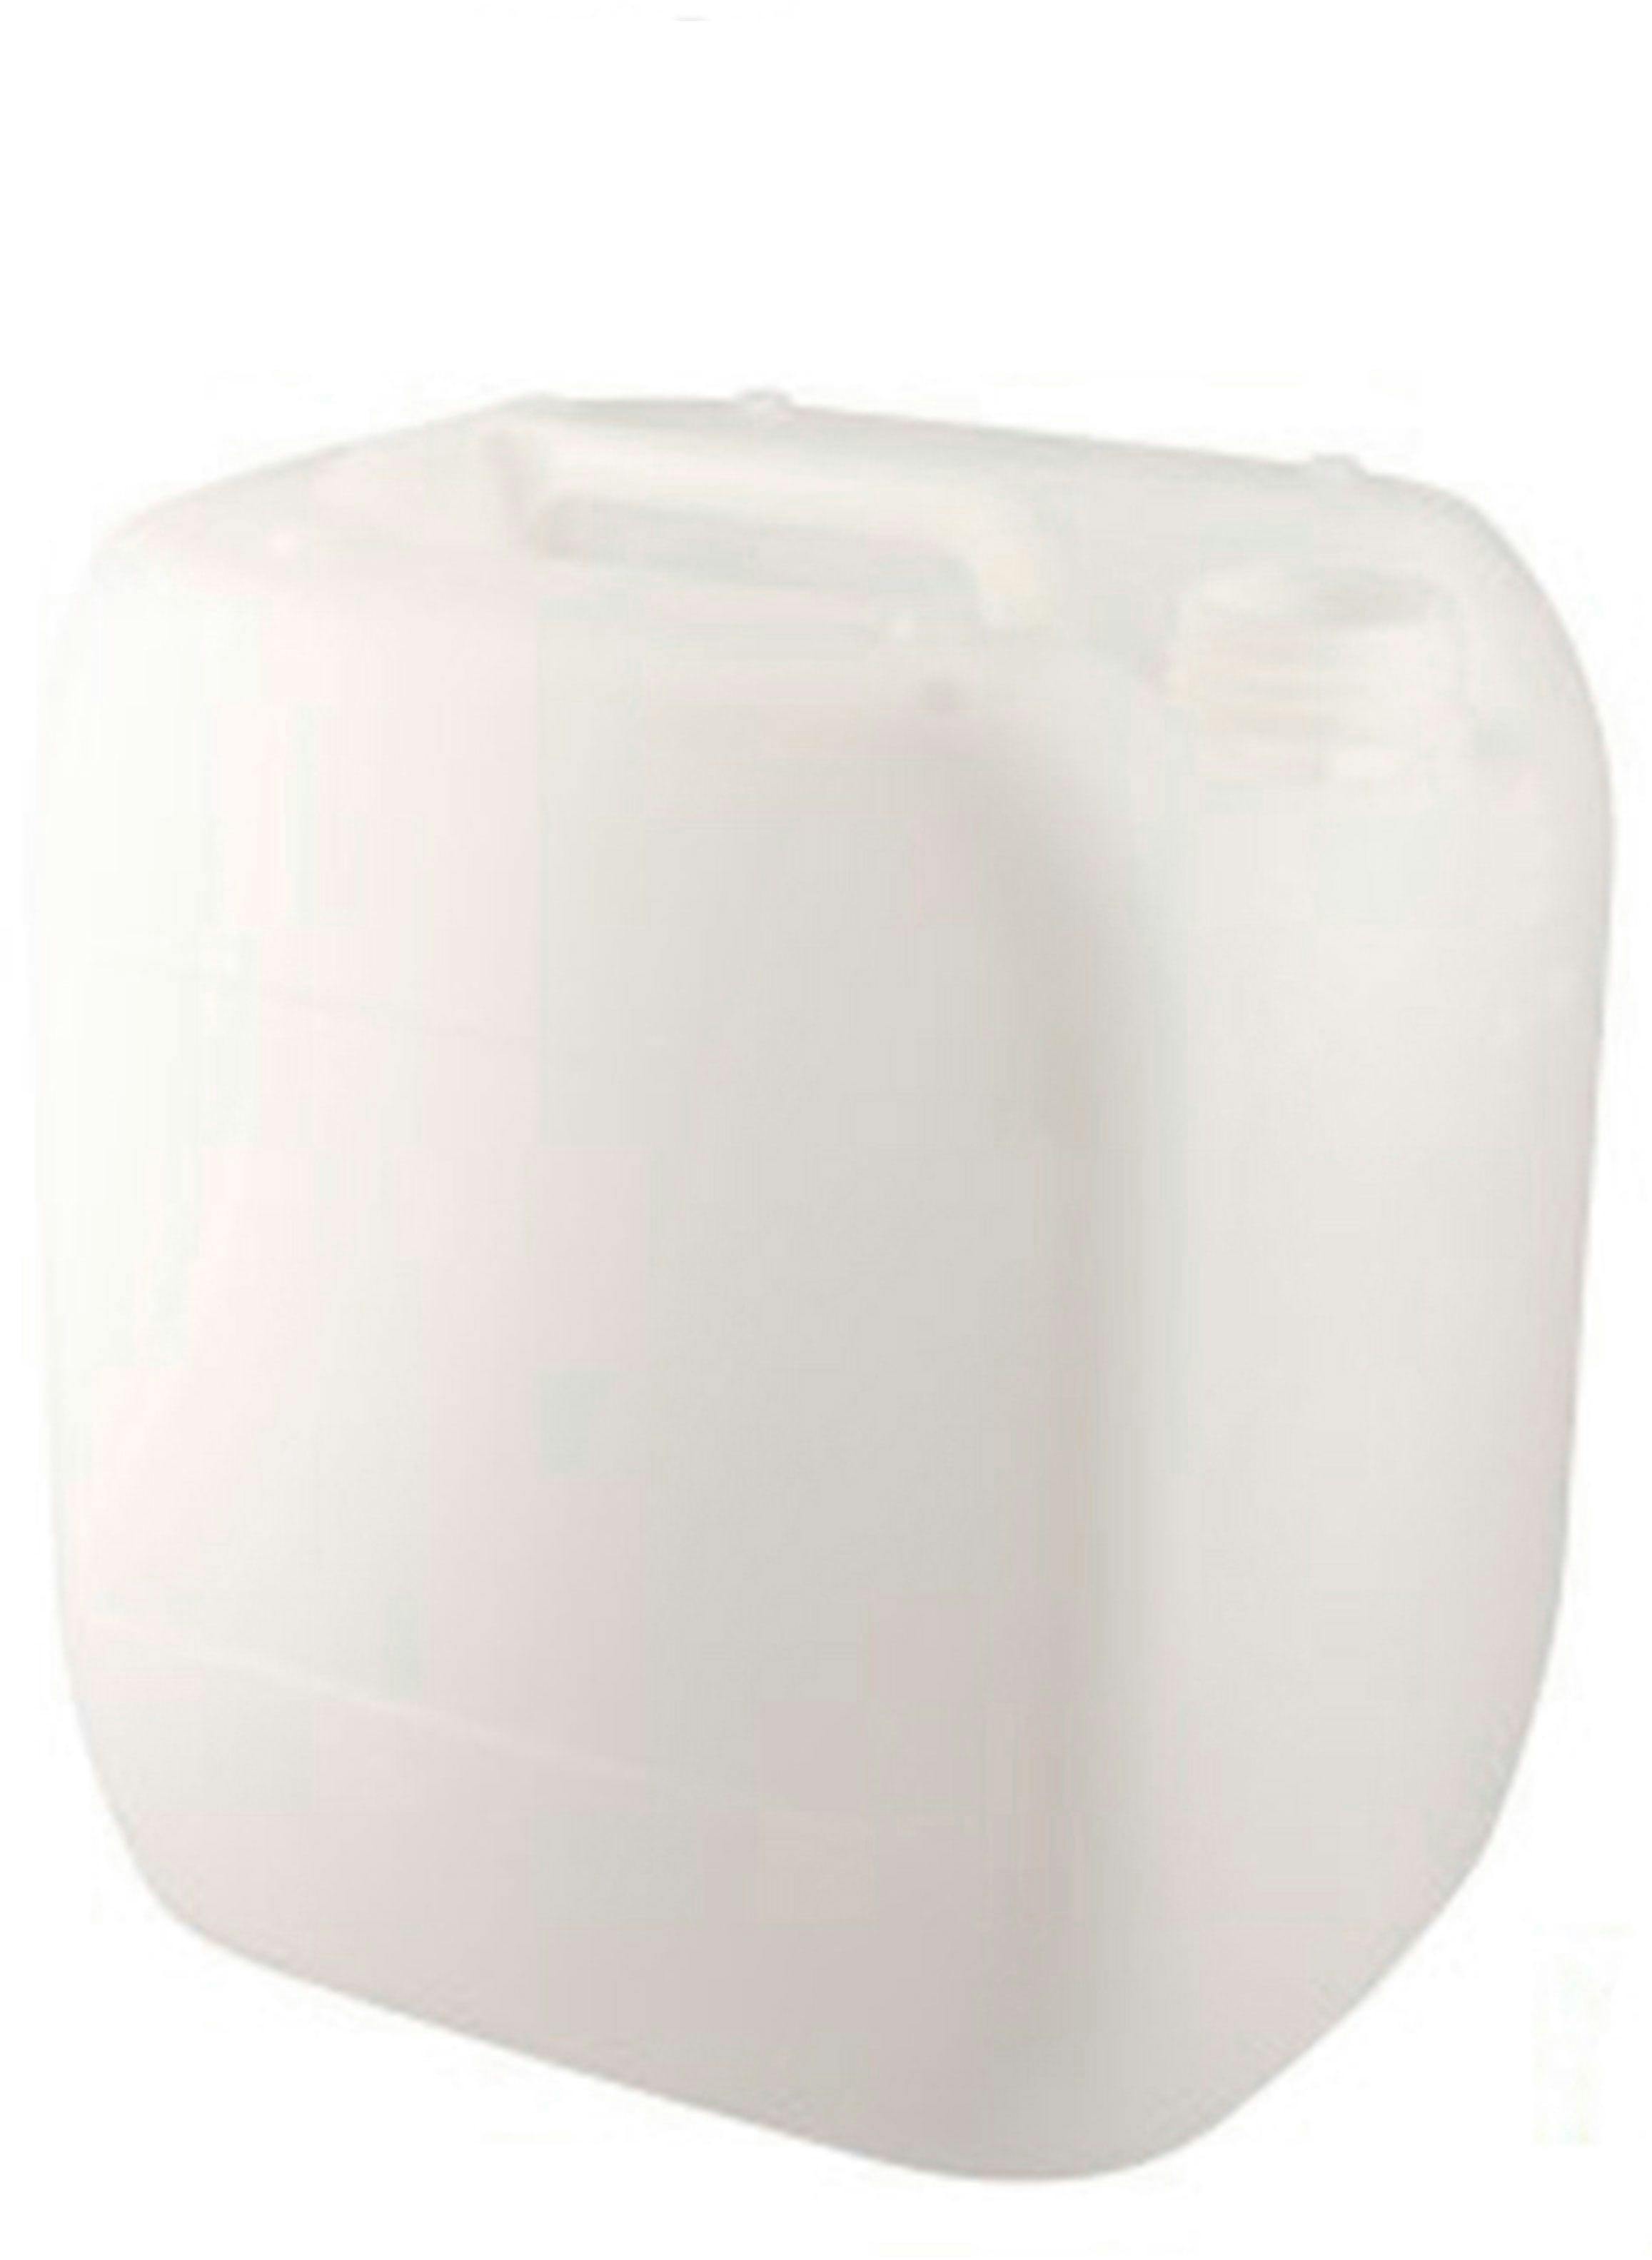 Jerrican stackable HDPE 16 liters natural approved  D61